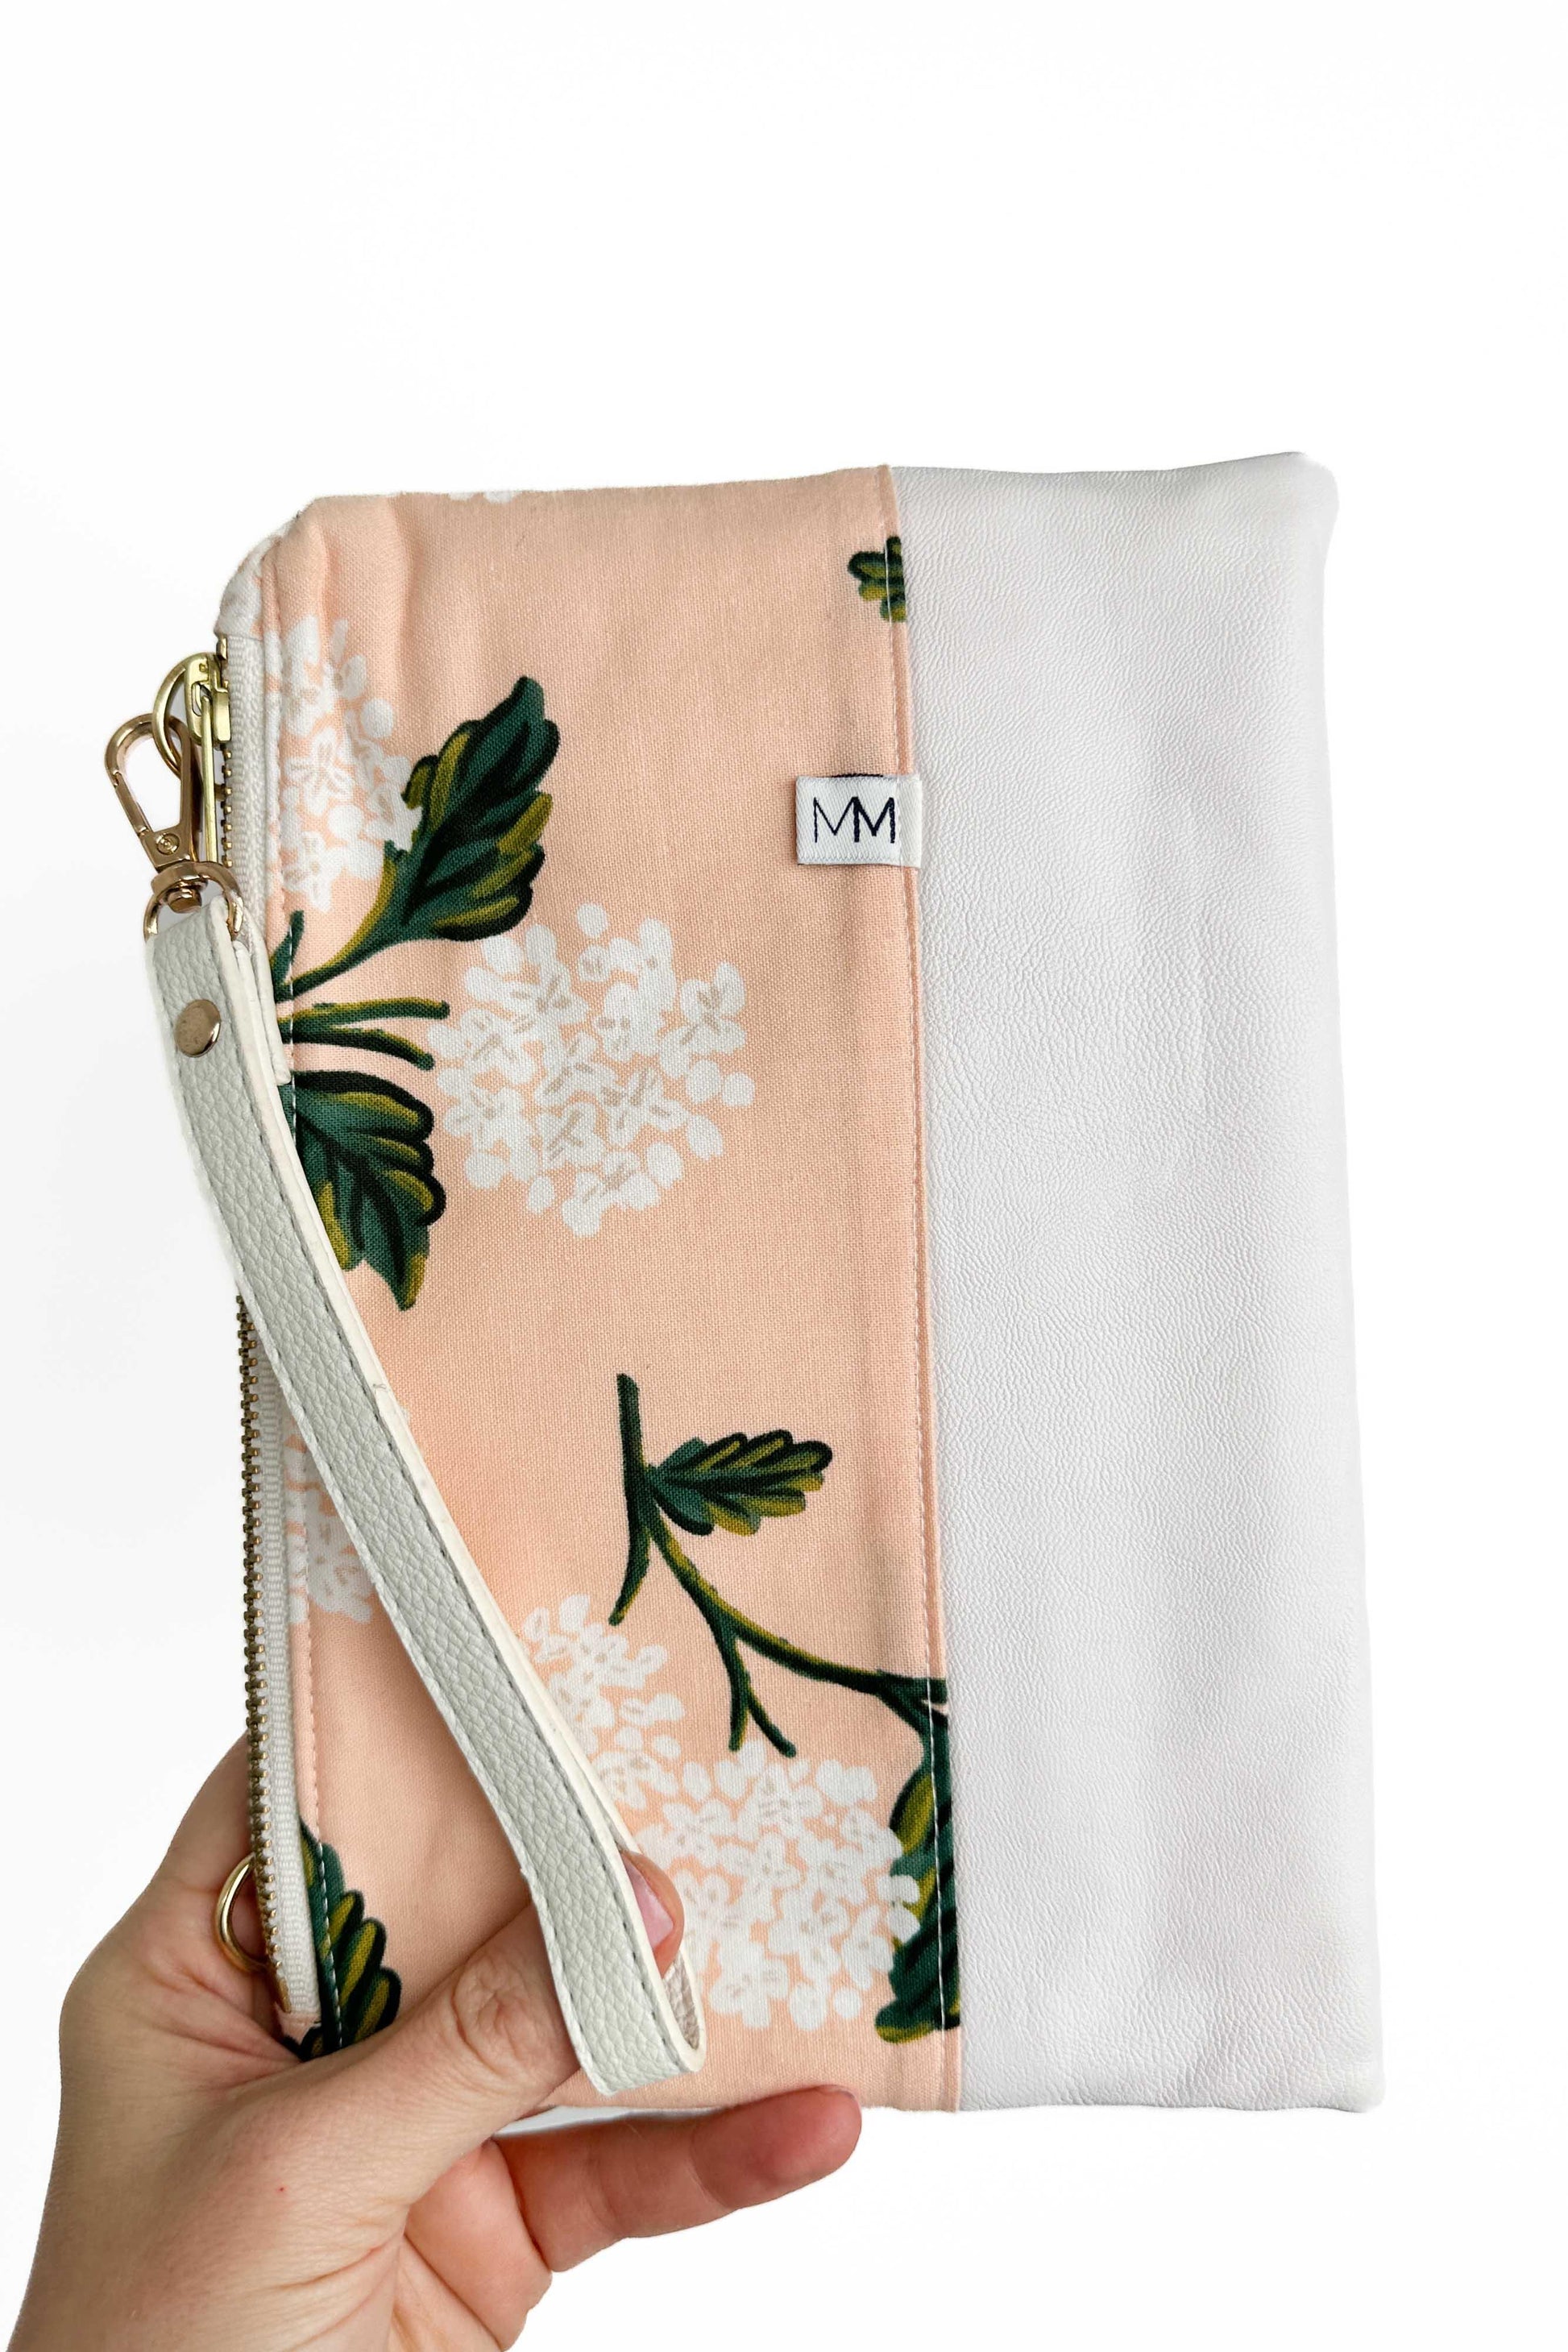 Peach Hydrangea Convertible Crossbody Wristlet+ with Compartments READY TO SHIP - Modern Makerie